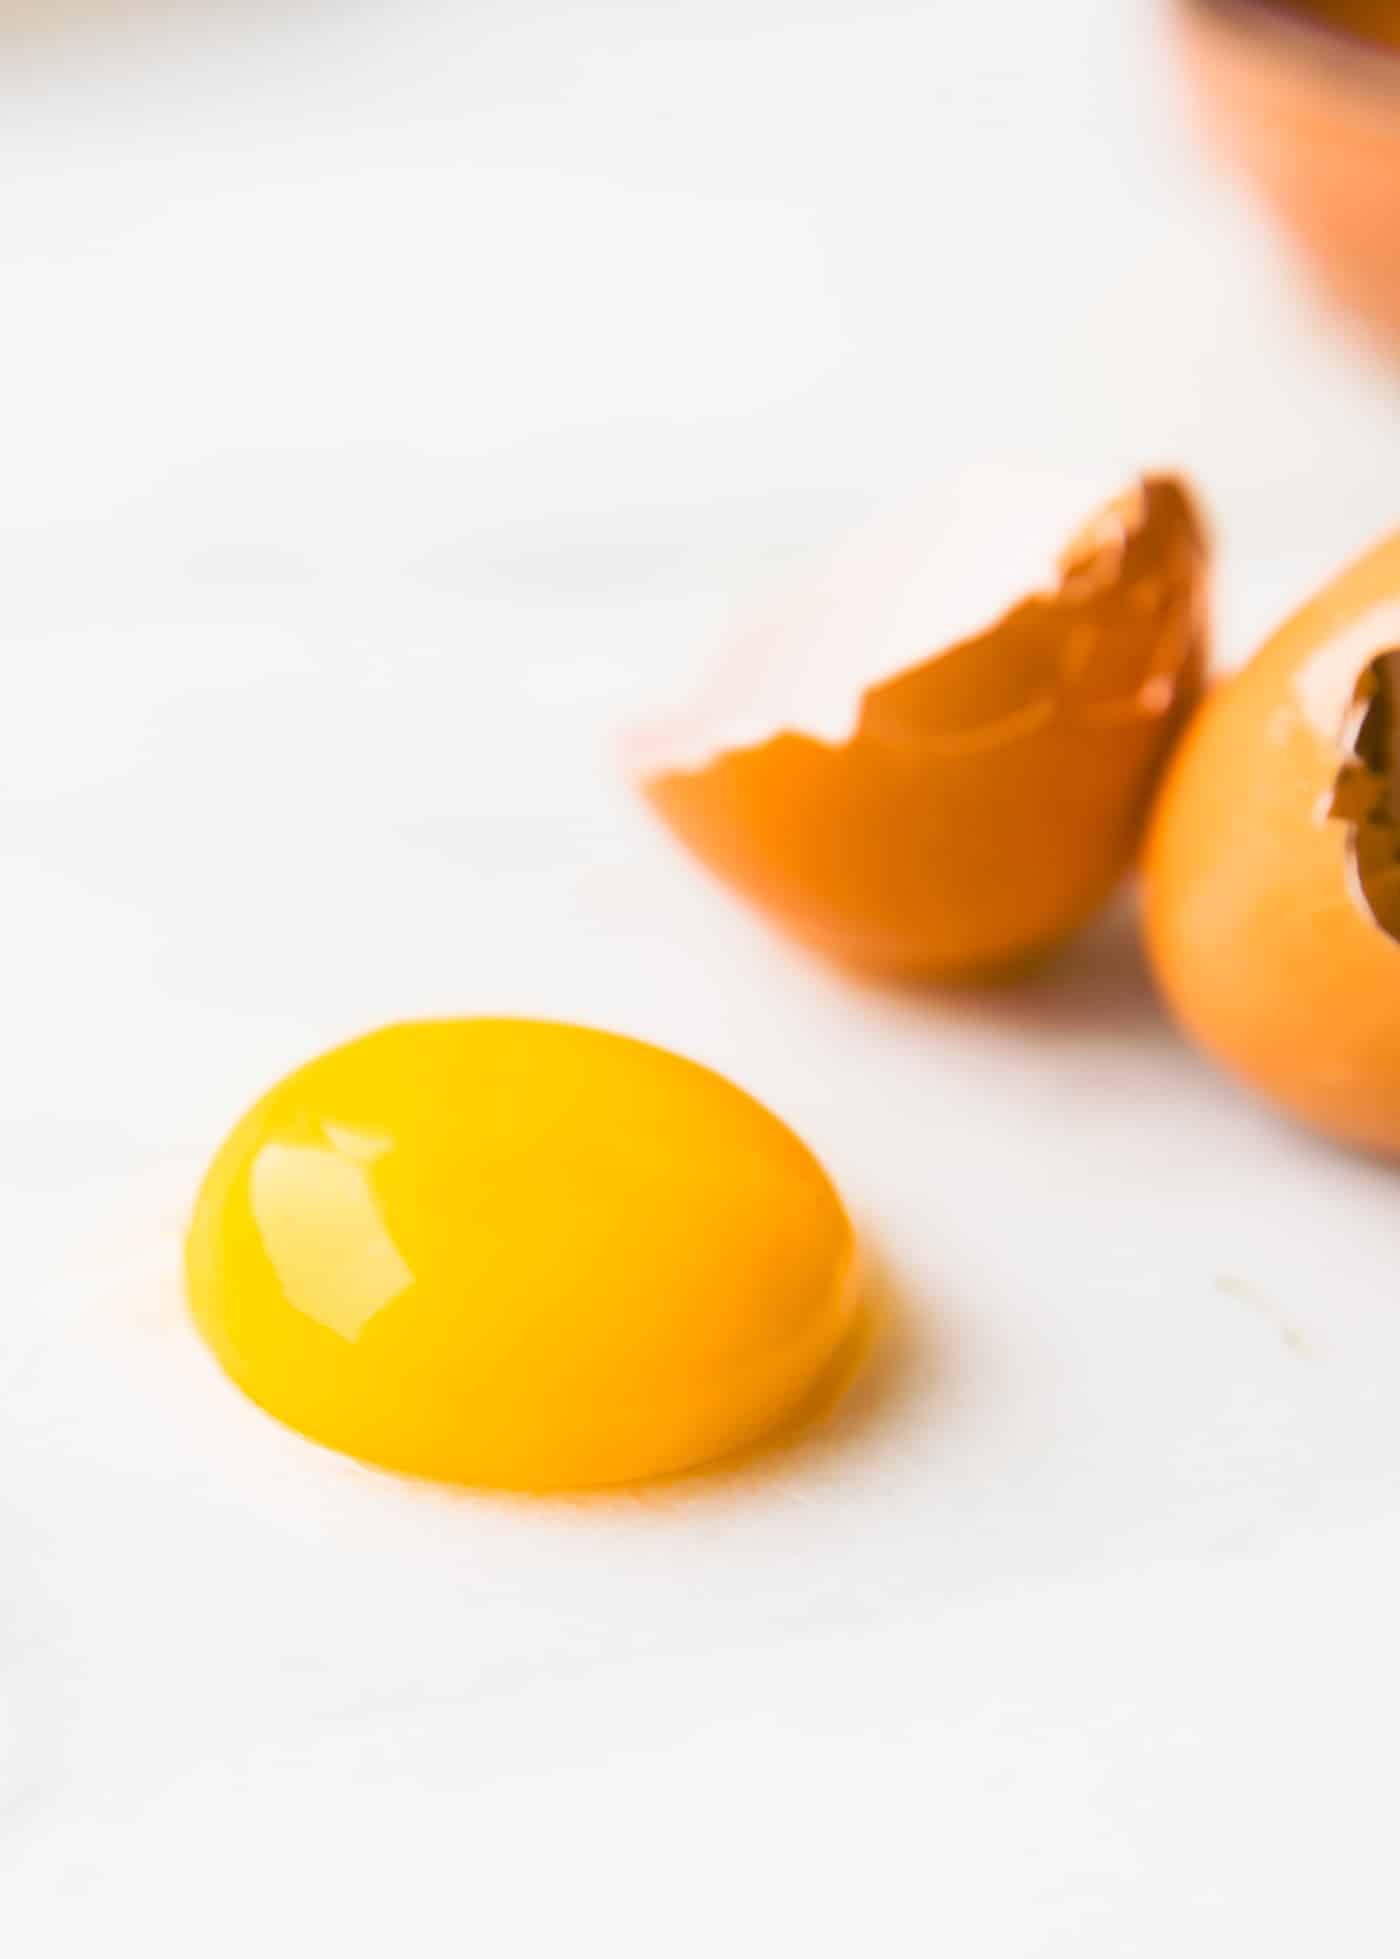 An egg yolk on counter with cracked shell in two pieces in background.